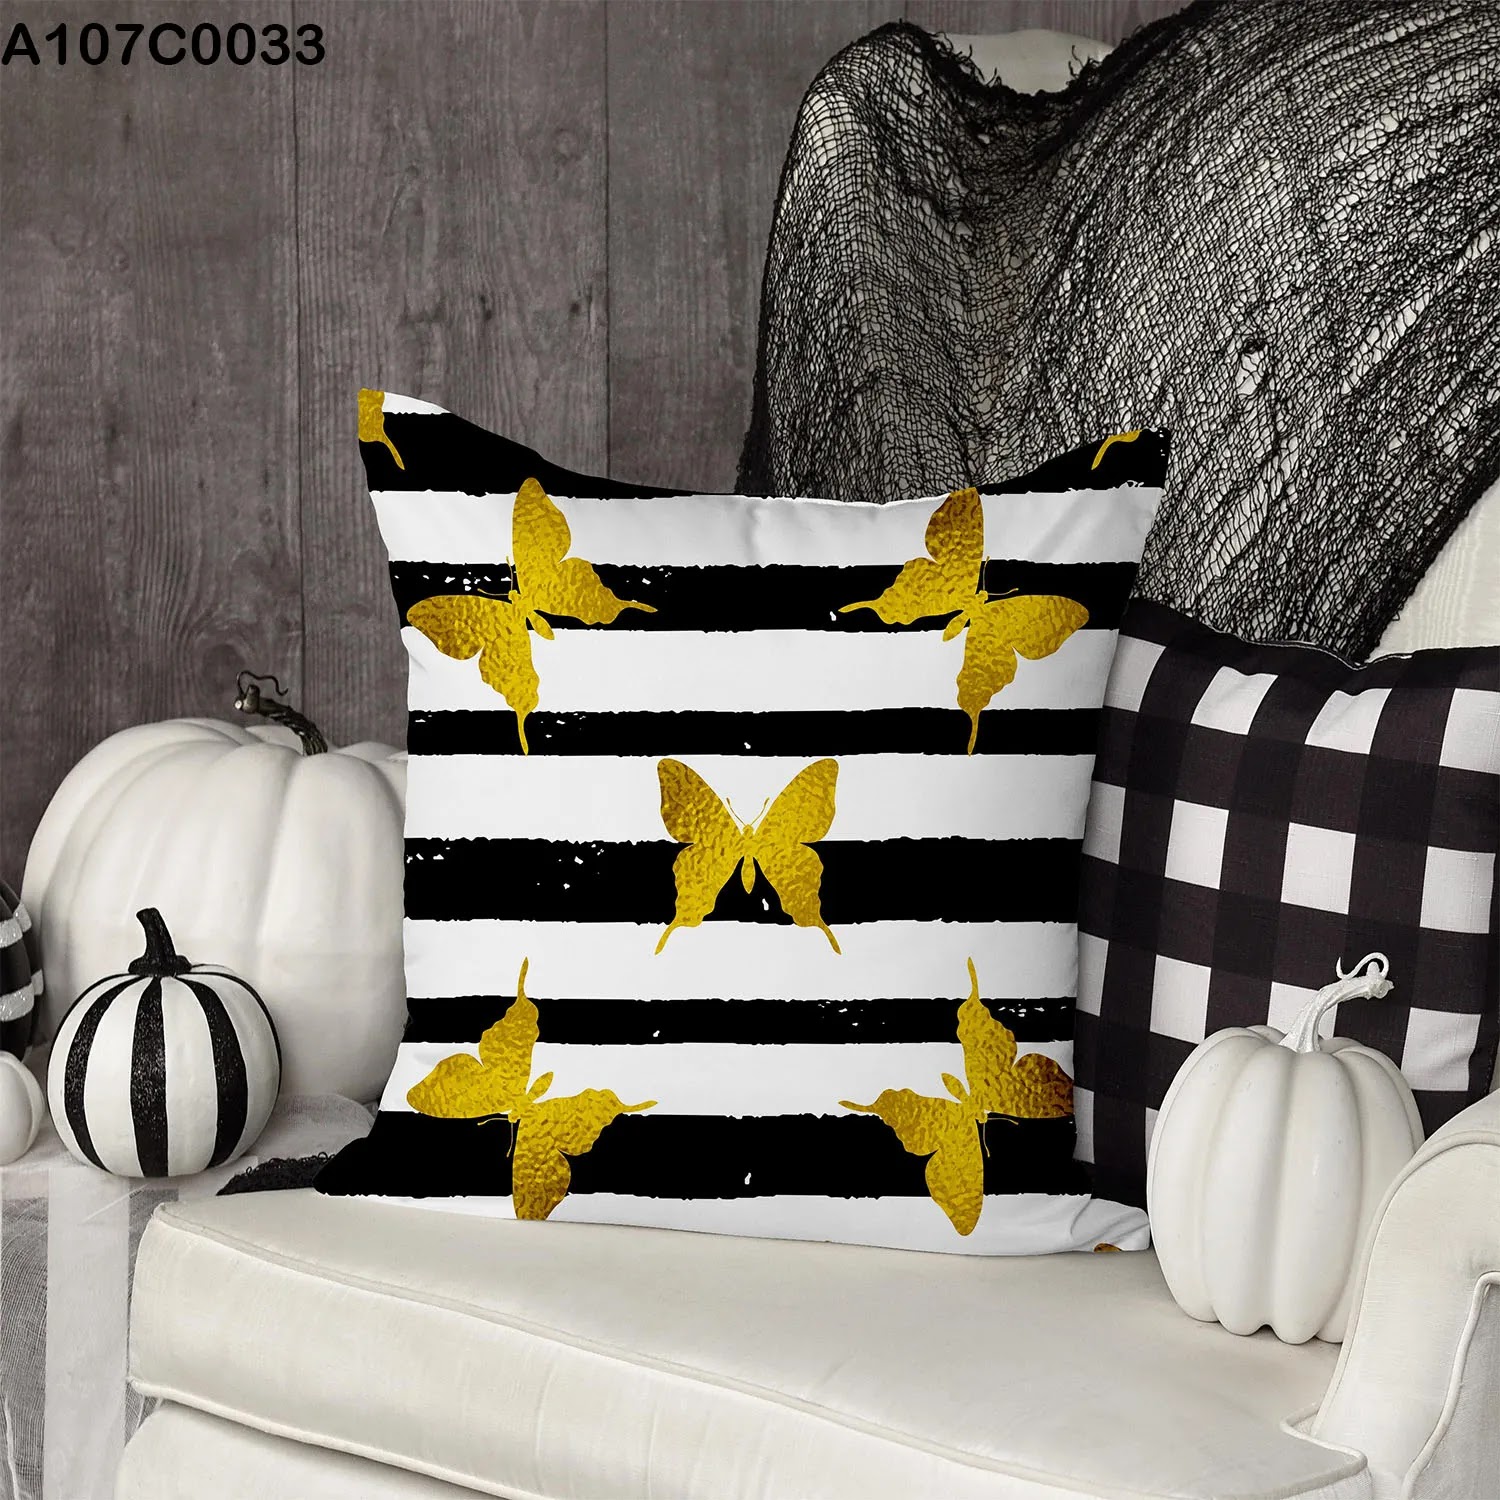 White and black striped pillow case and gold butterflies